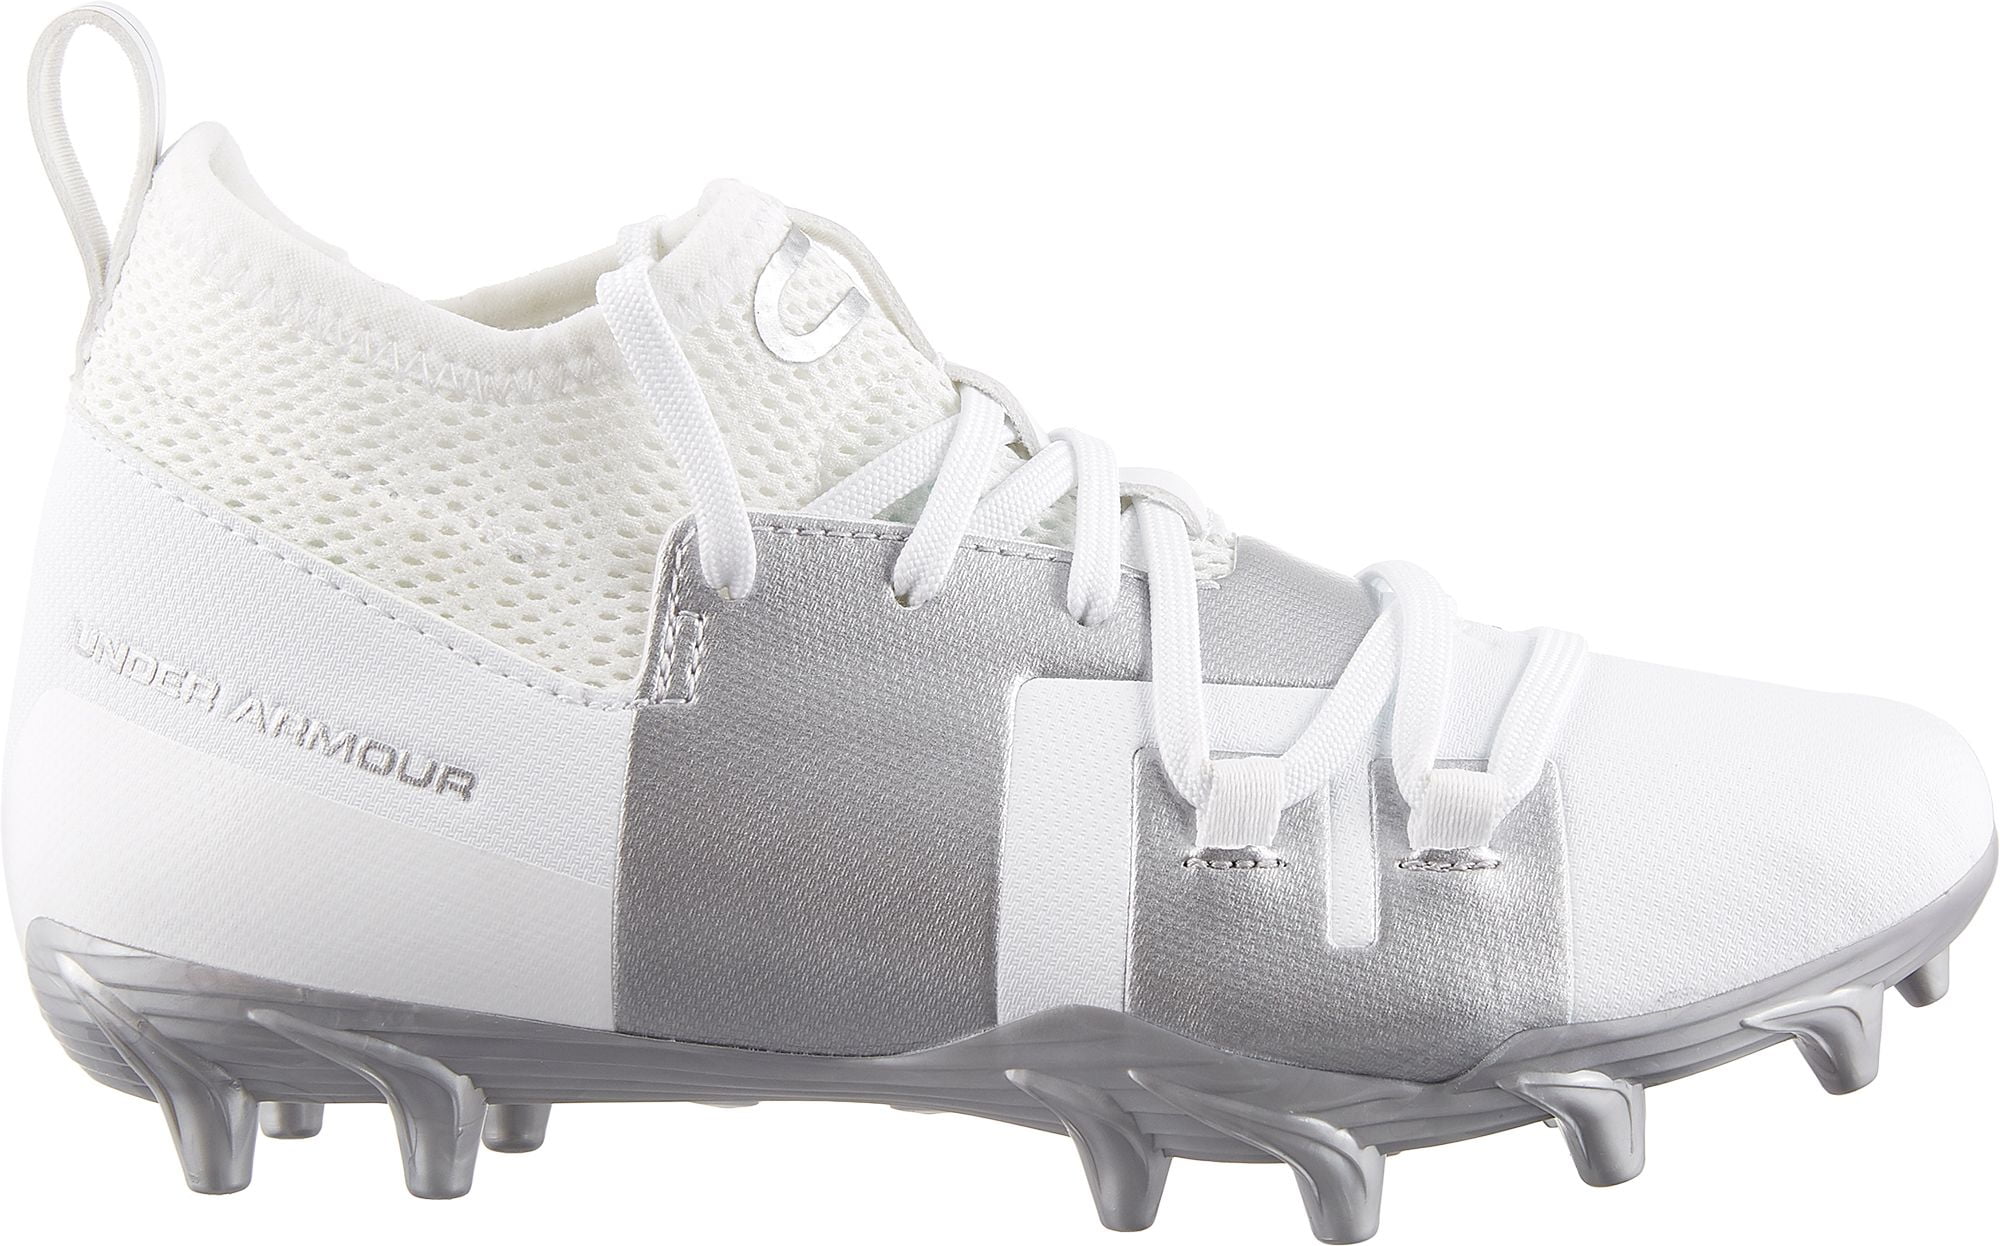 Details about   Under Armour C1N Mid D Size 13 Football Cleats Shoes Black/White 1264317-001 NIB 